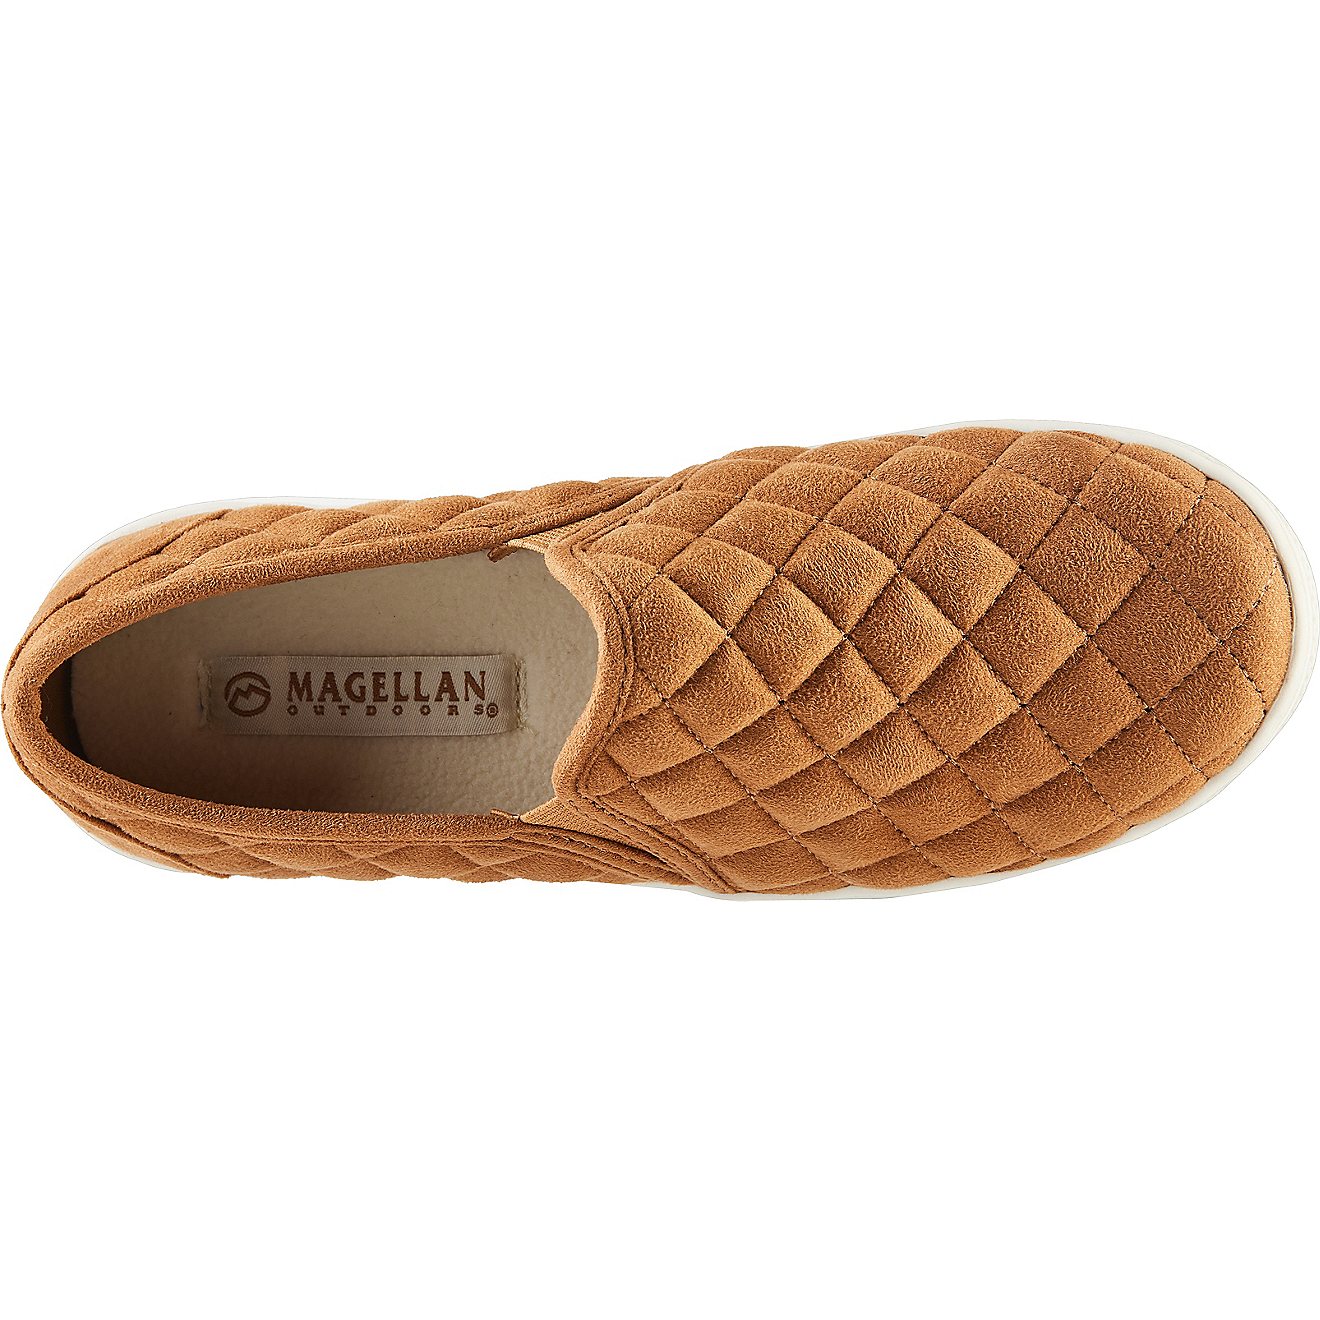 Magellan Outdoors Women's Quilted Twin Gore Slip-On Shoes                                                                        - view number 3